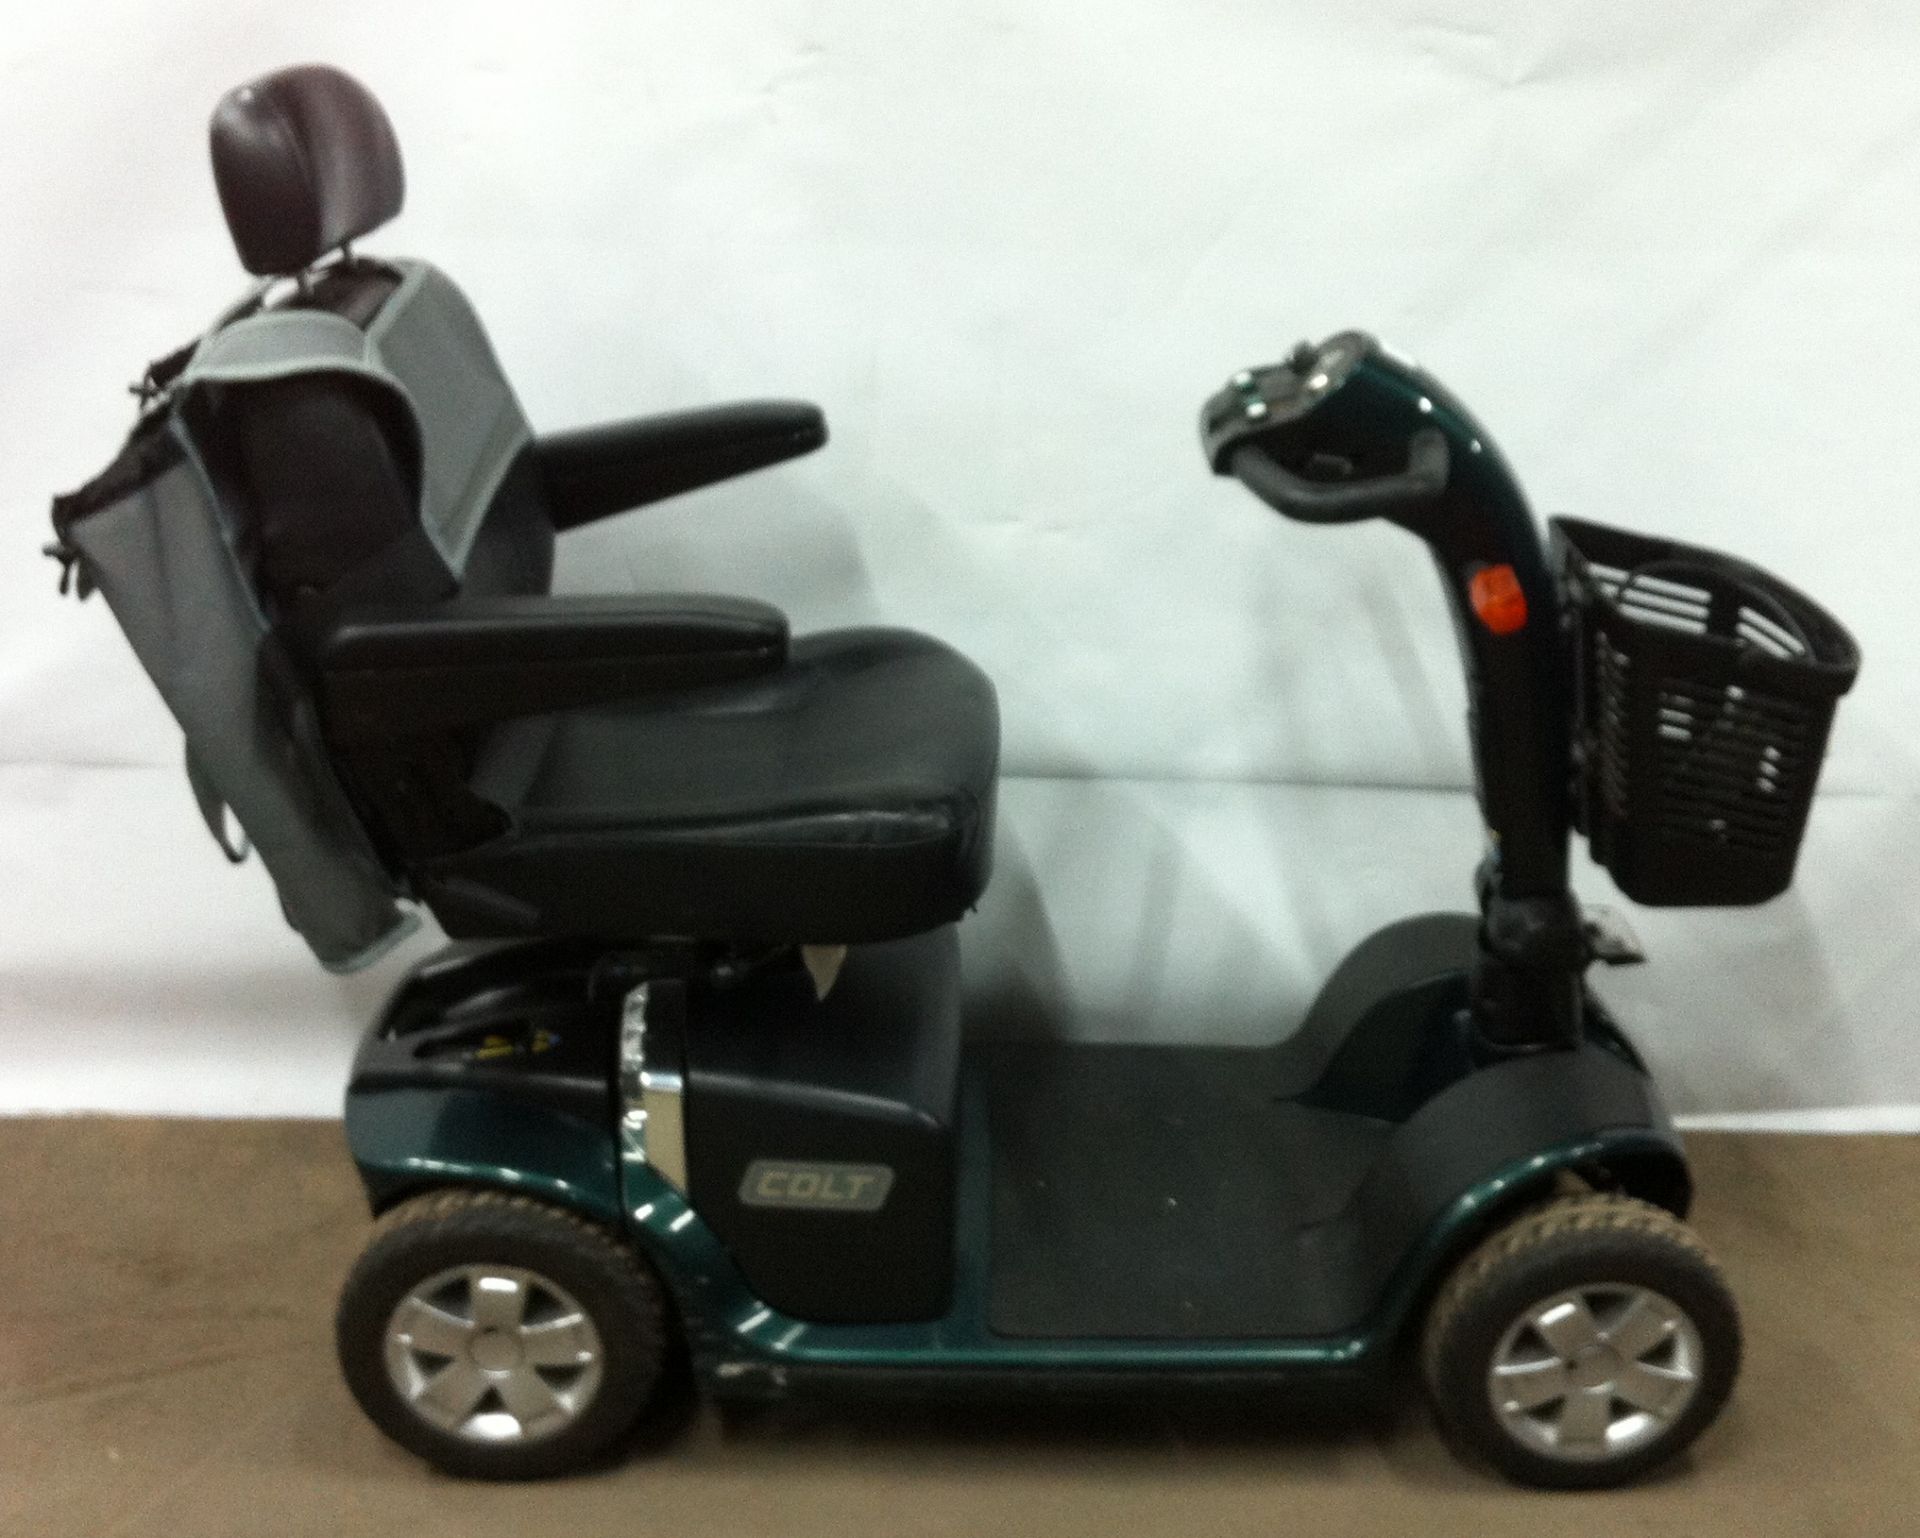 Pride Colt mobility scooter